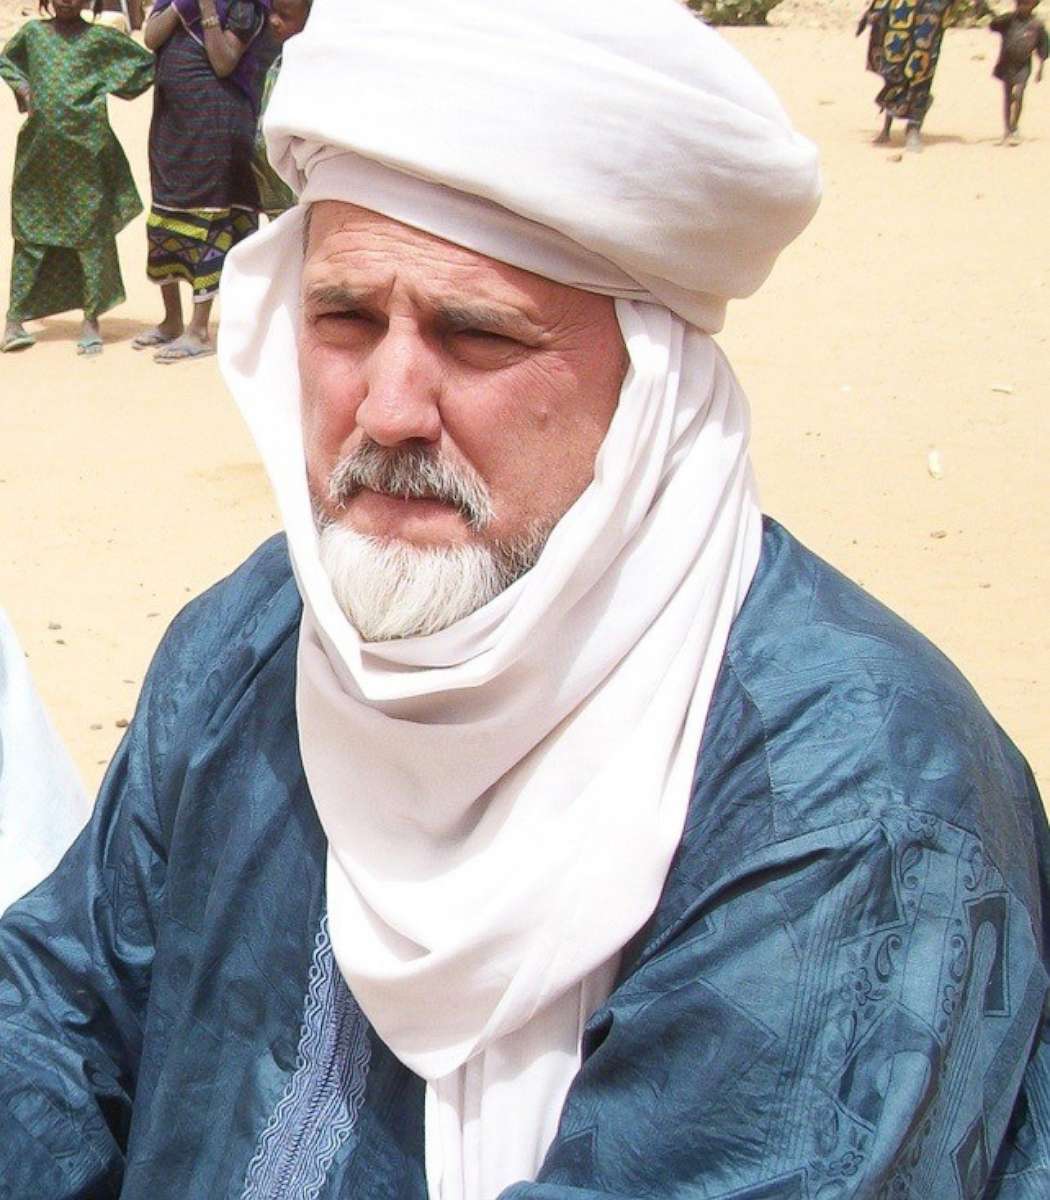 PHOTO: American missionary Jeffery Woodke in Niger prior to his kidnapping by Islamist militants in 2016.